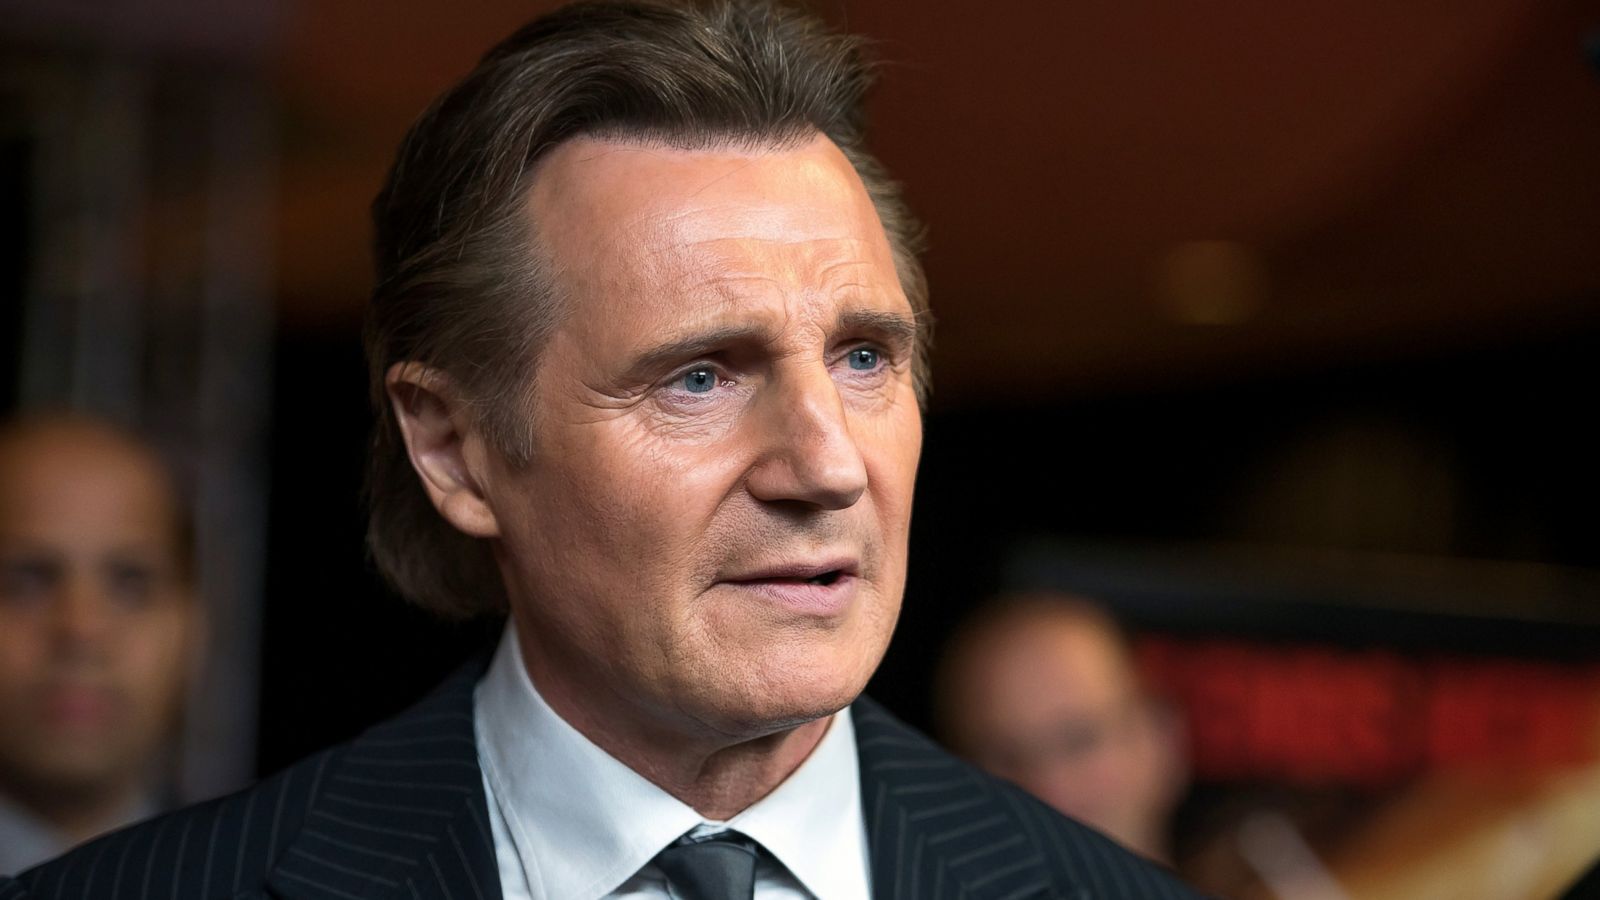 Liam Neeson Stands Firm on Gun Control Advocacy in the United States - News